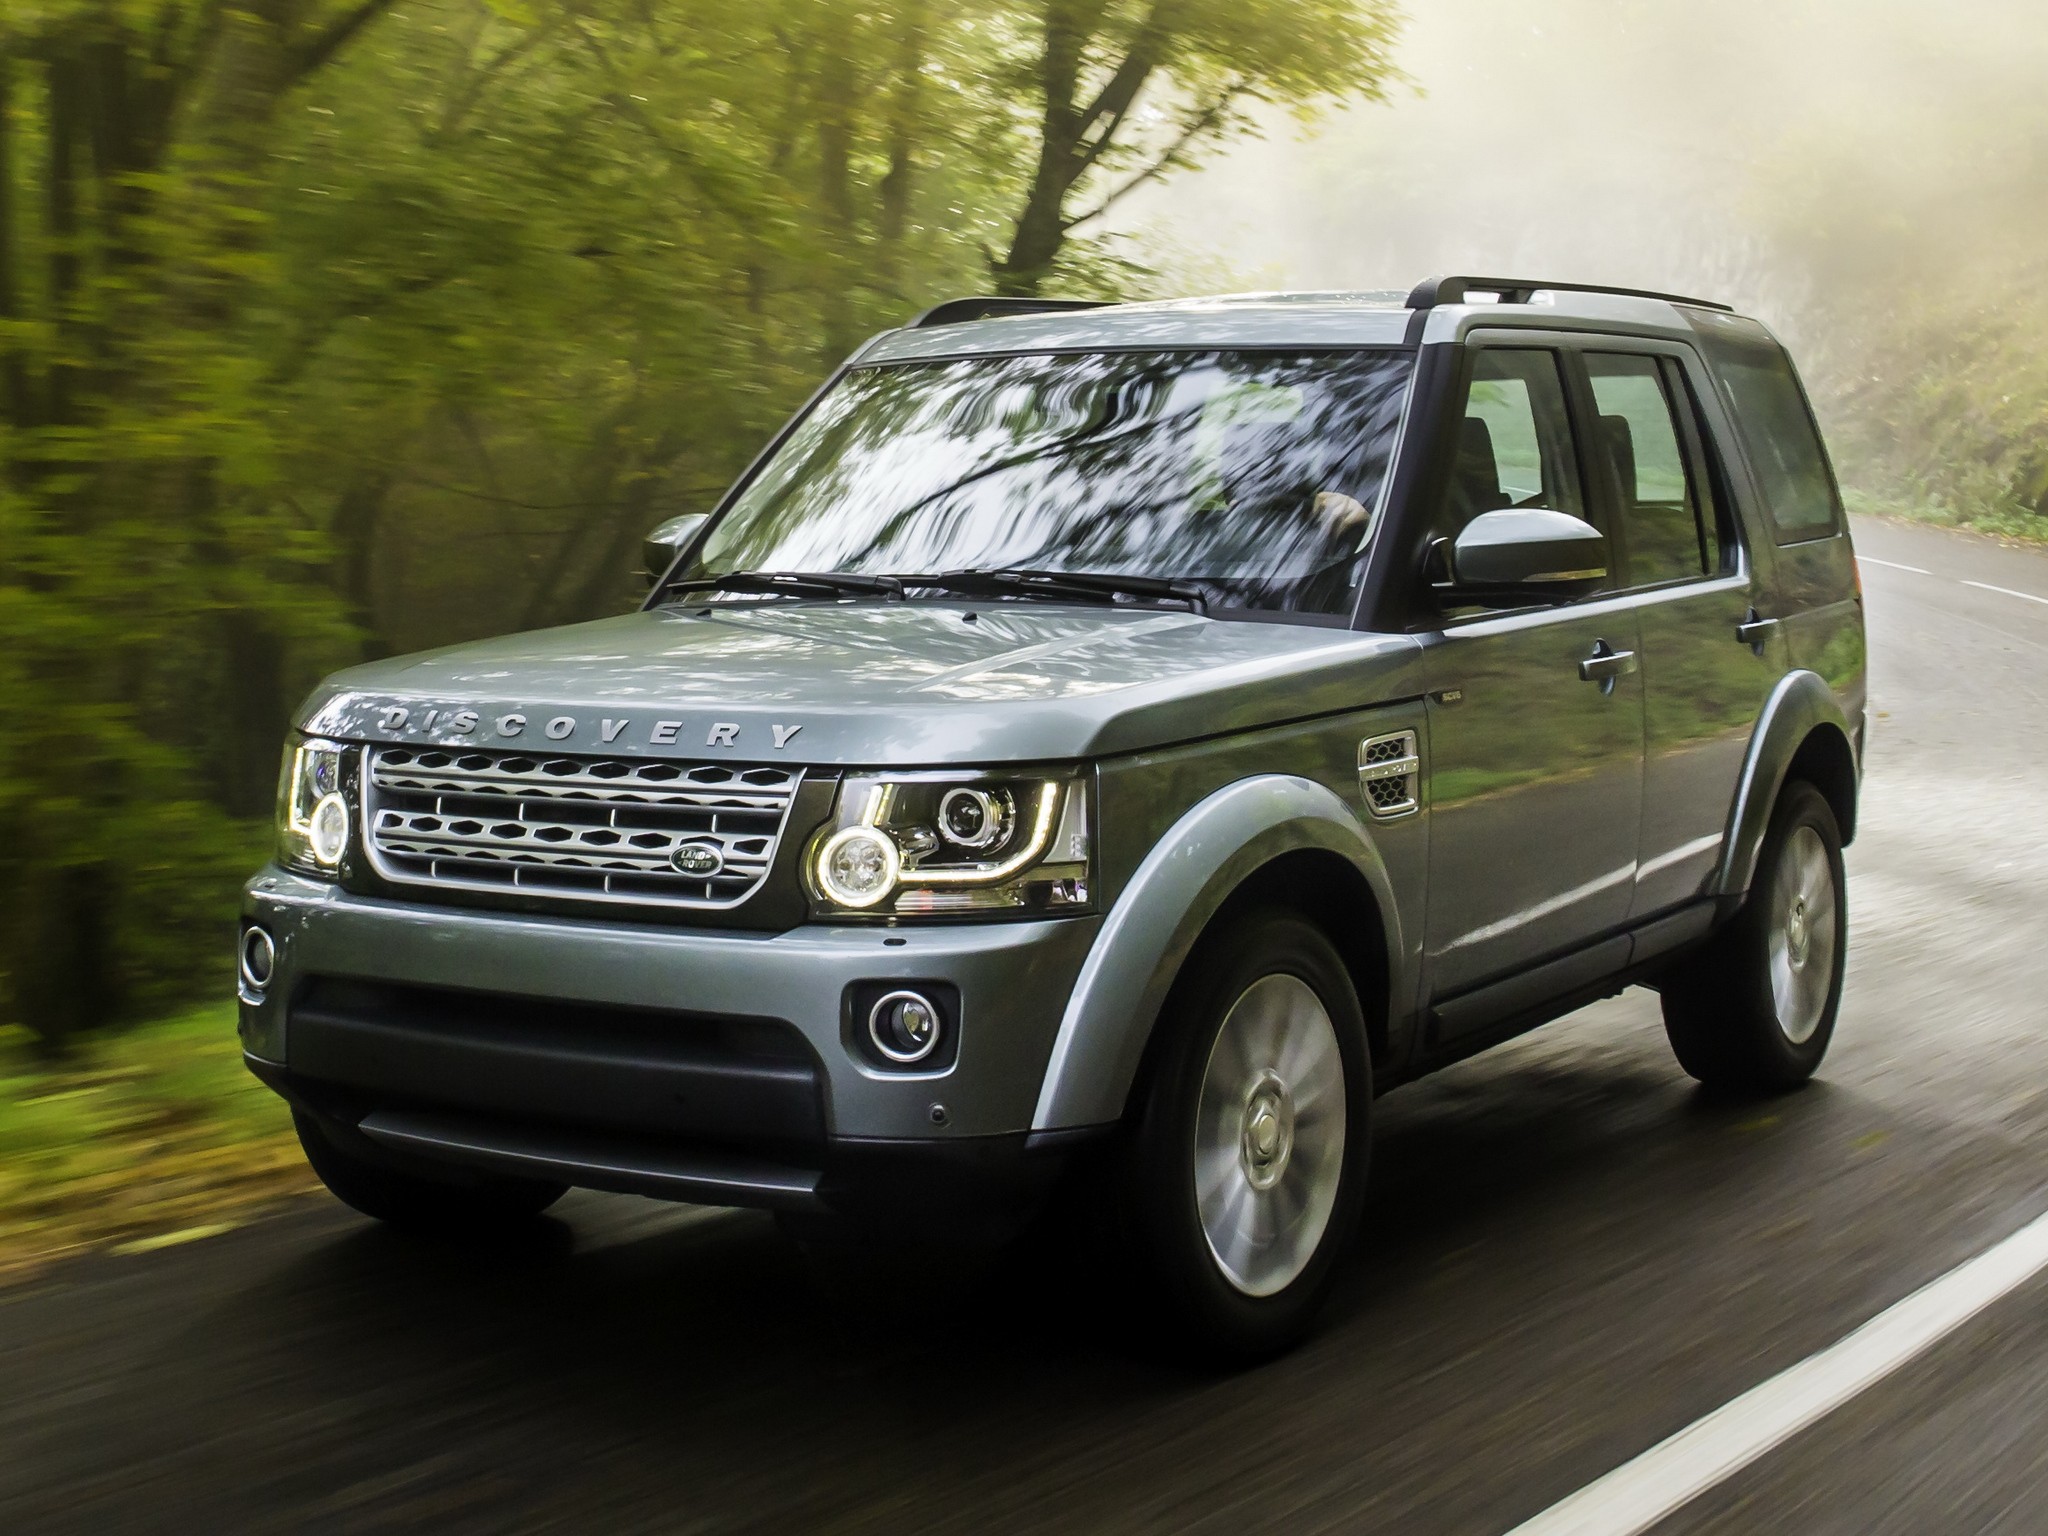 2021 Land Rover Discovery Facelift Gets New Engines And 